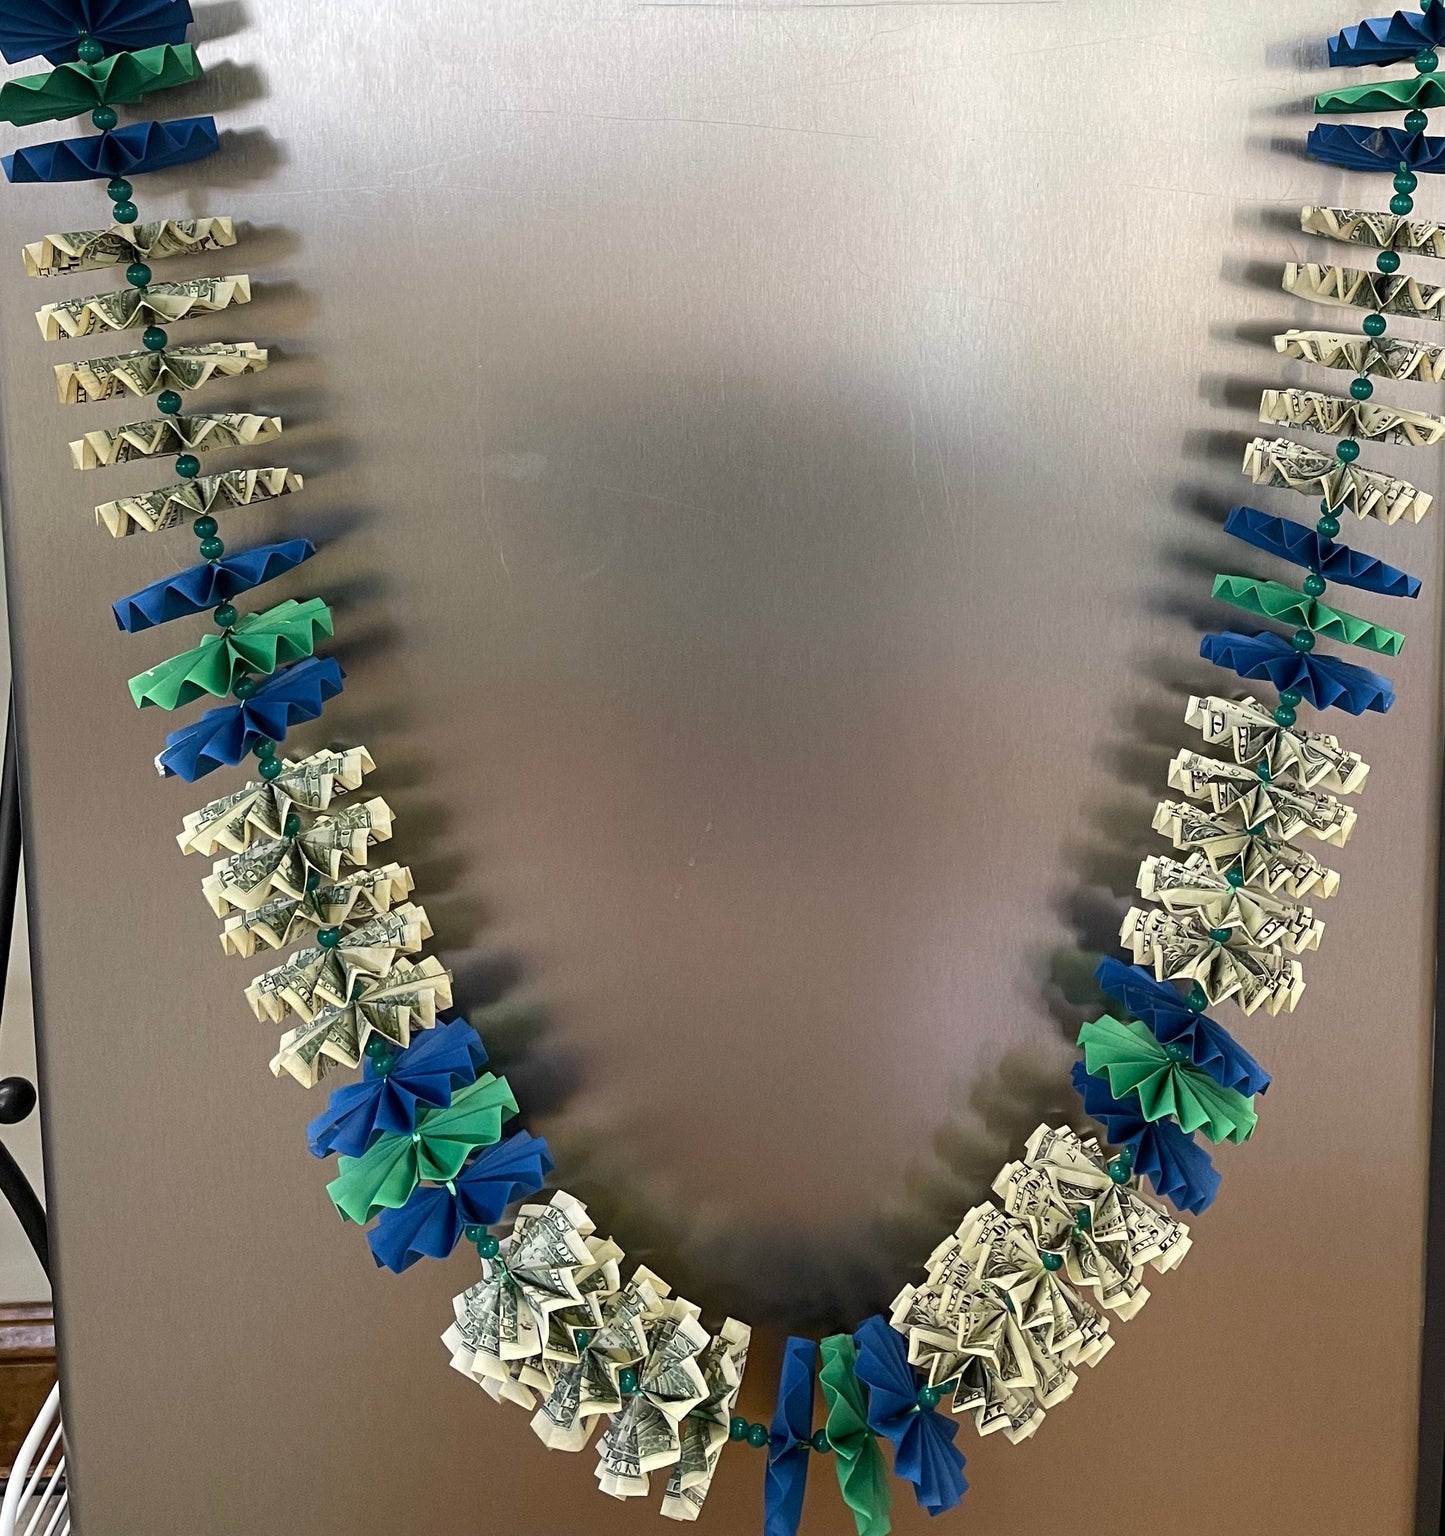 $30 in Cash Blue and Green Graduation Money Lei